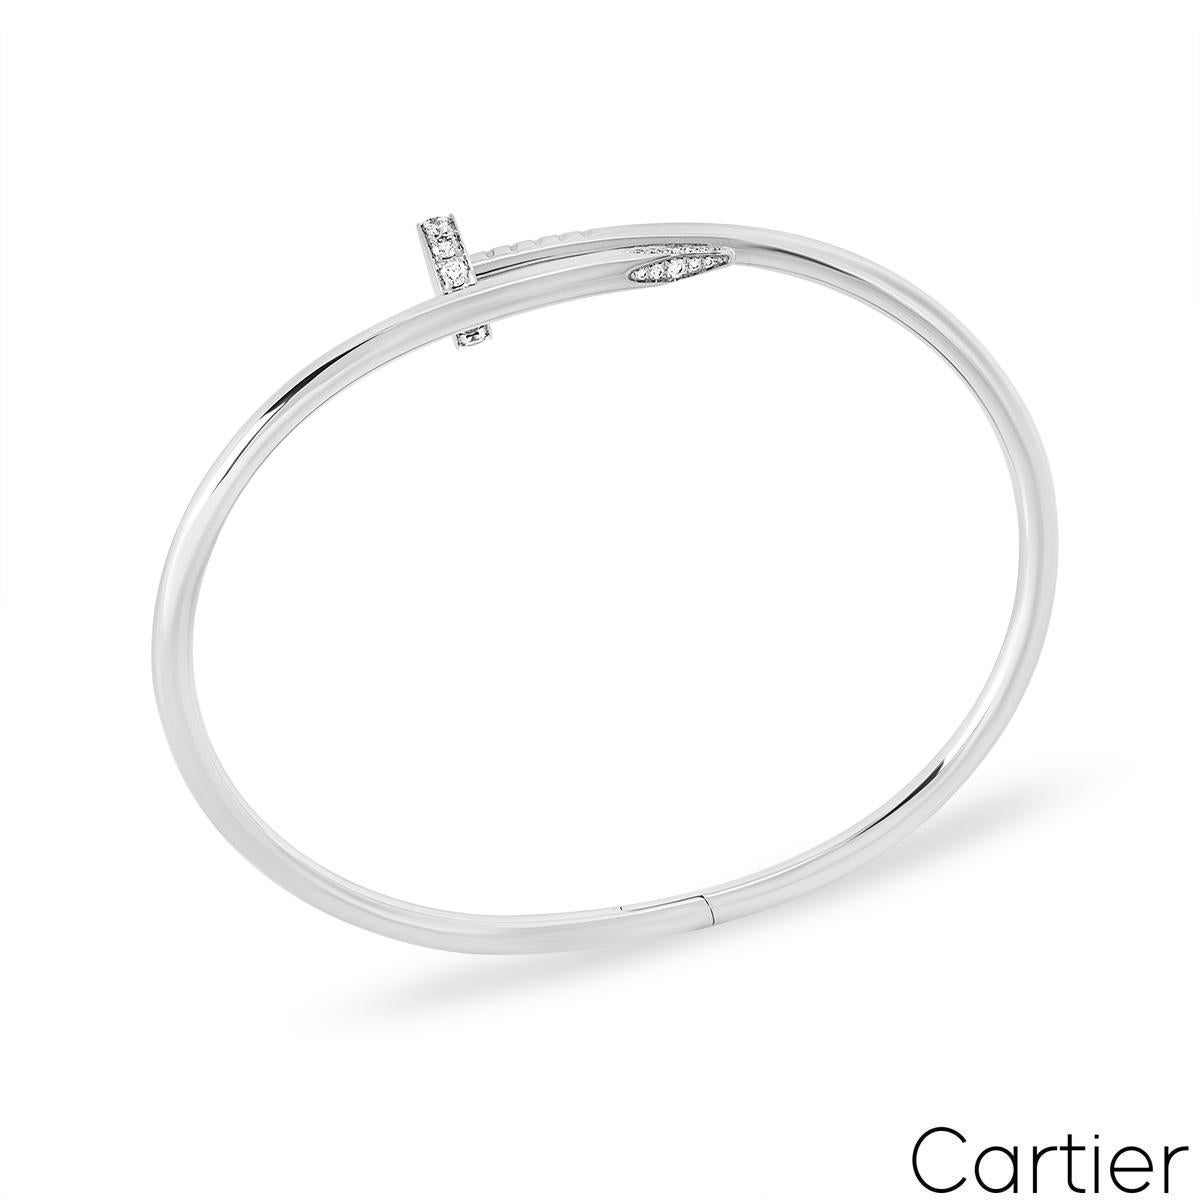 A signature 18k white gold Cartier diamond bracelet from the Juste Un Clou collection. This bracelet has style of a nail with 32 round brilliant cut pave diamonds set in the head and tip, totalling 0.58ct. The diamonds are predominantly F colour and